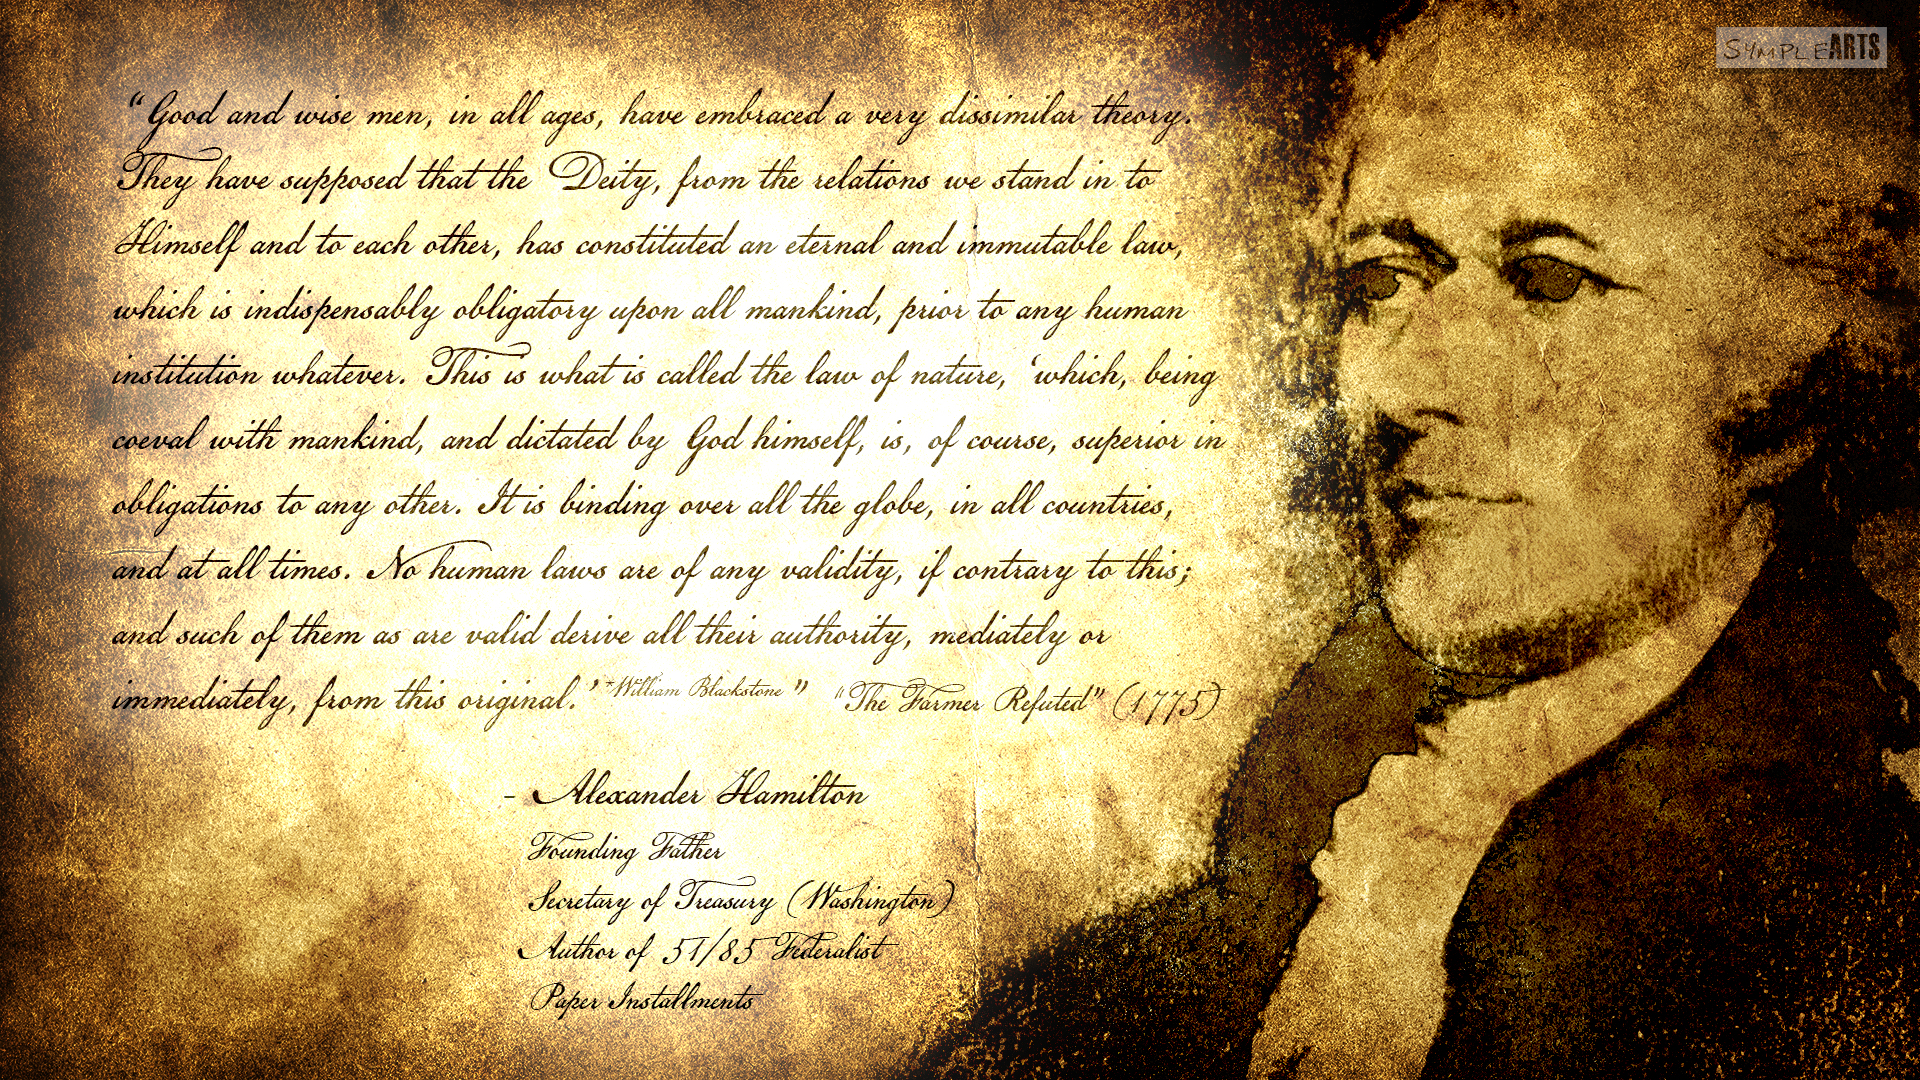  Of Church And State Alexander Hamilton by SympleArts on deviantART